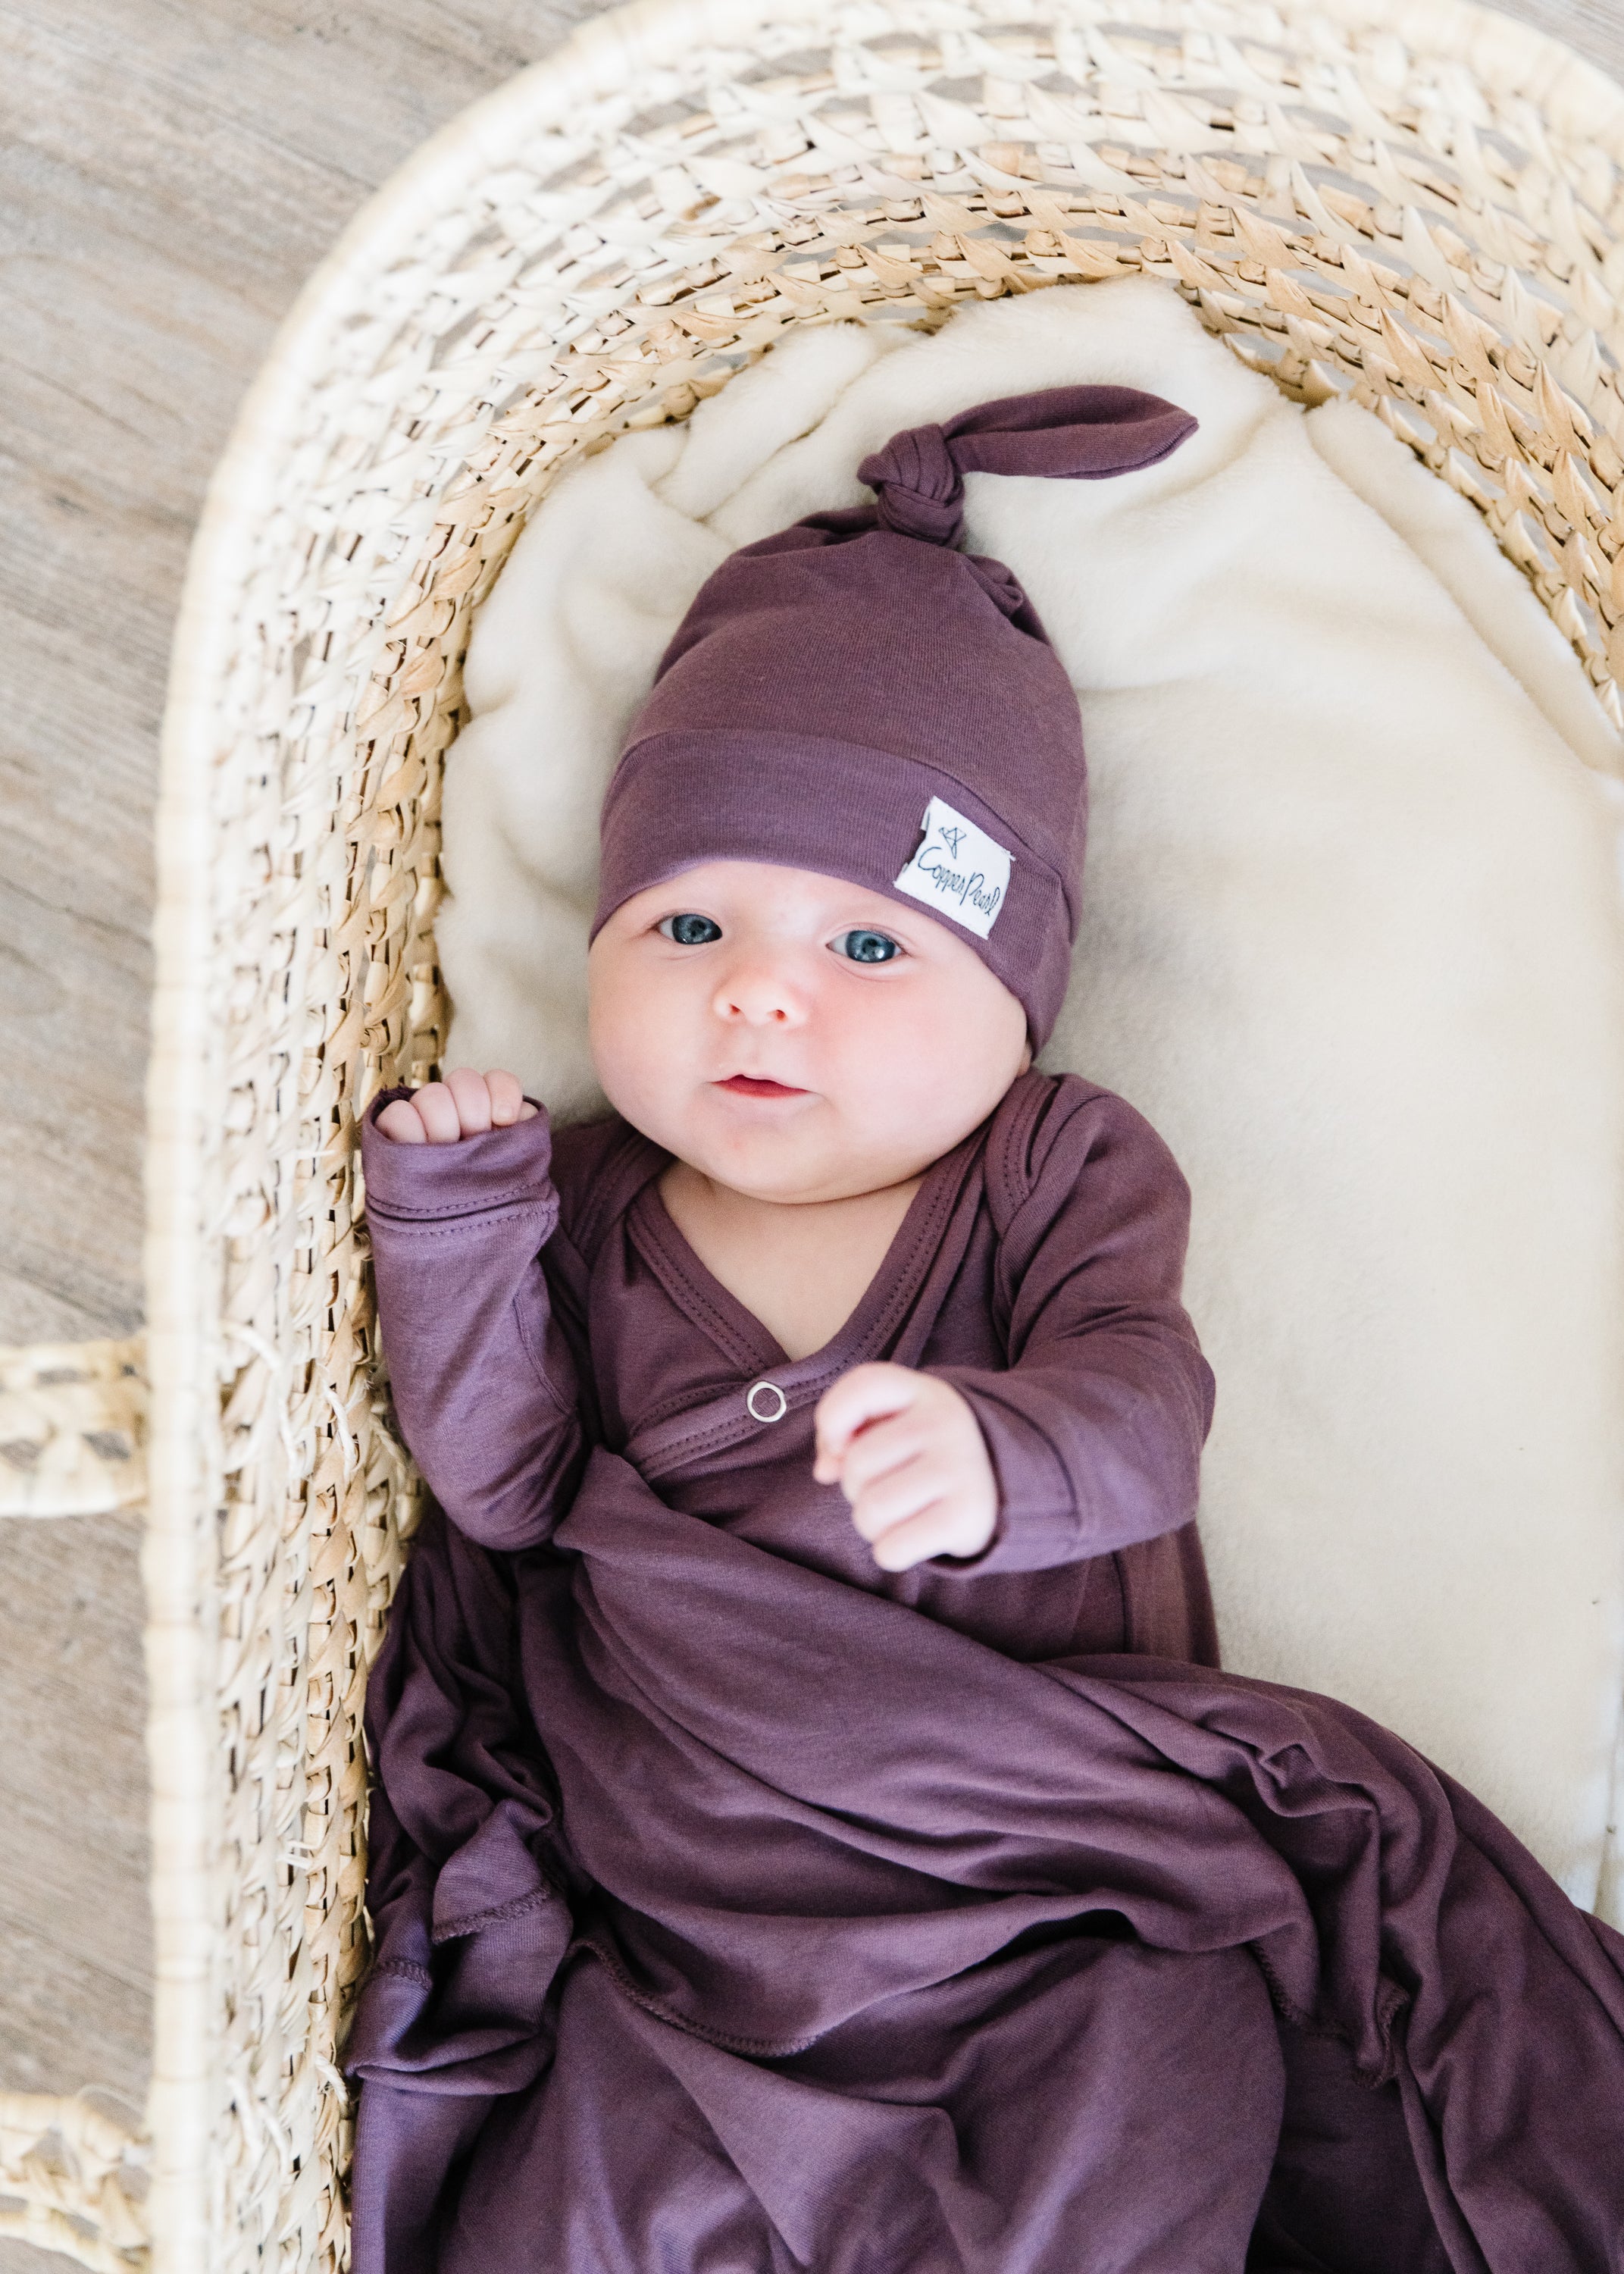 Newborn Knotted Gown - Plum